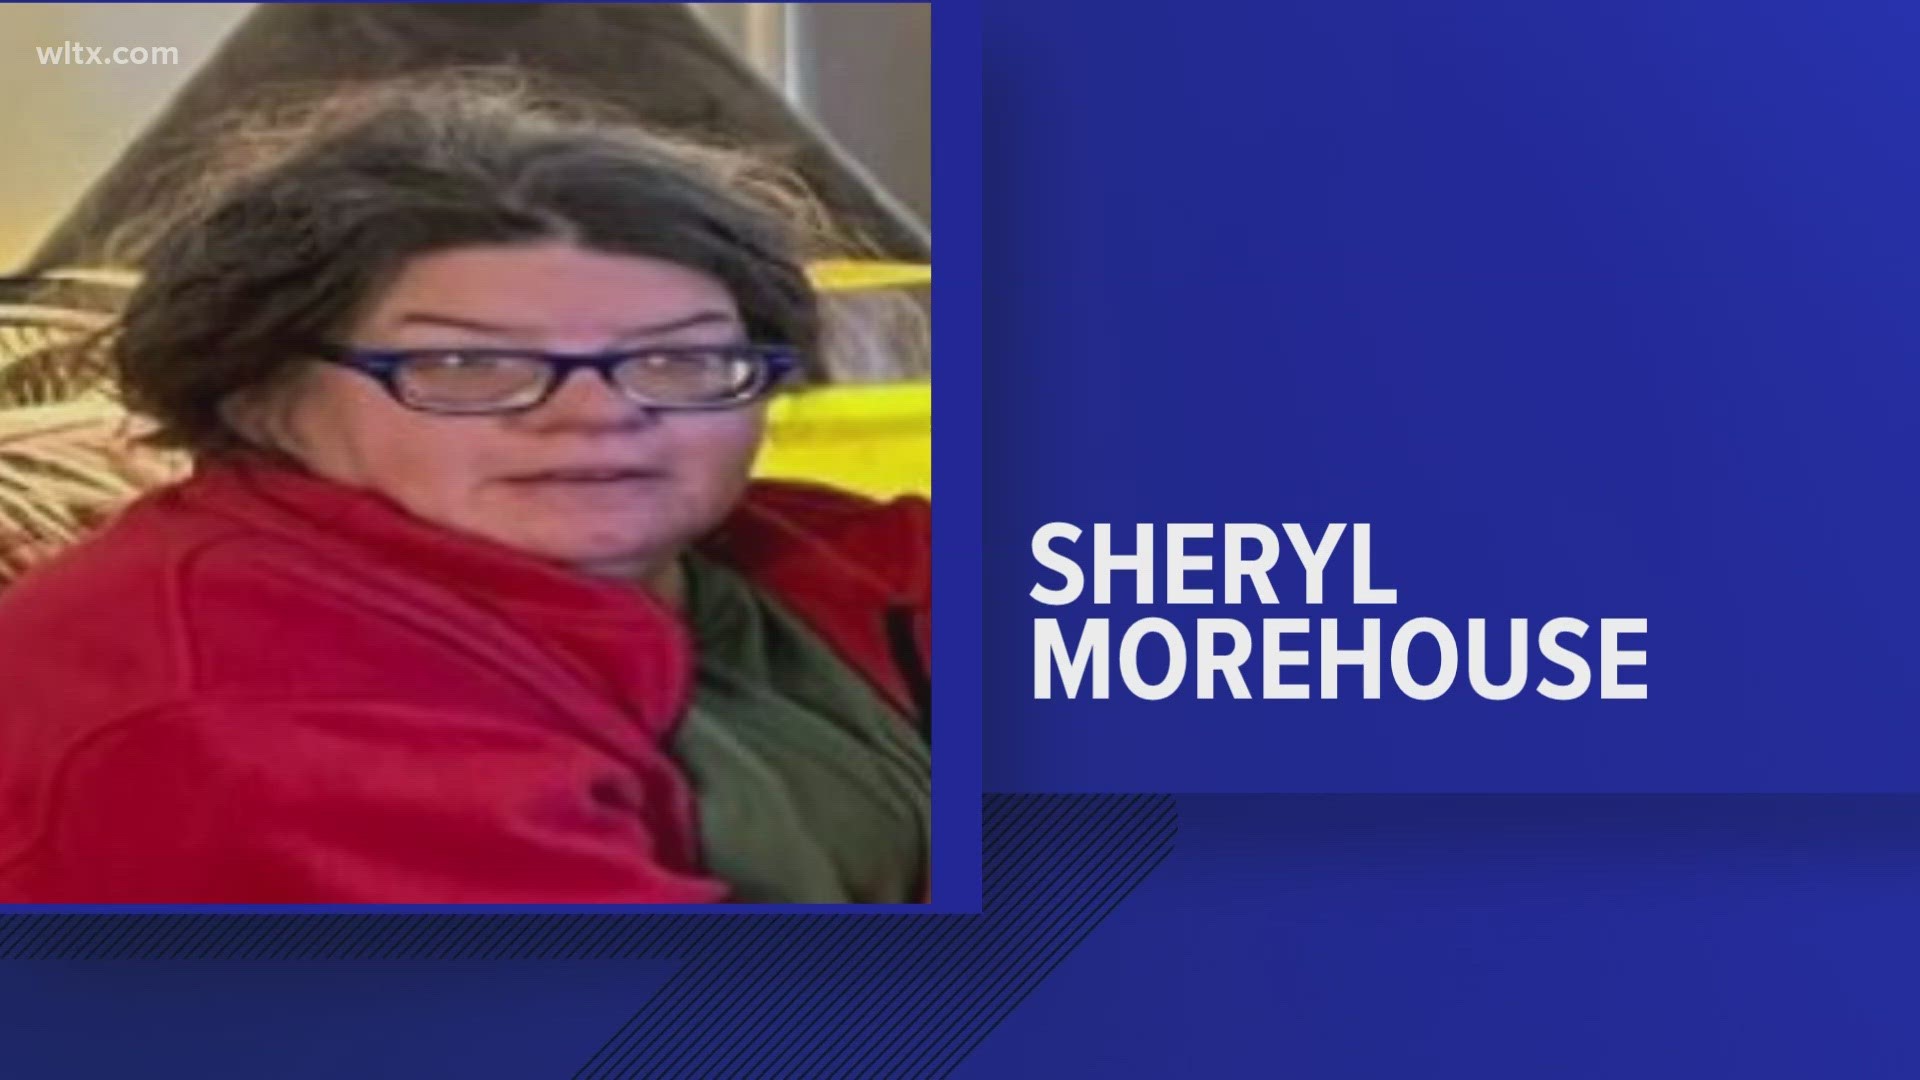 Police say 55-year-old Sheryl Morehouse was last seen on Tuesday, March 14, in her McDonald's restaurant work attire.